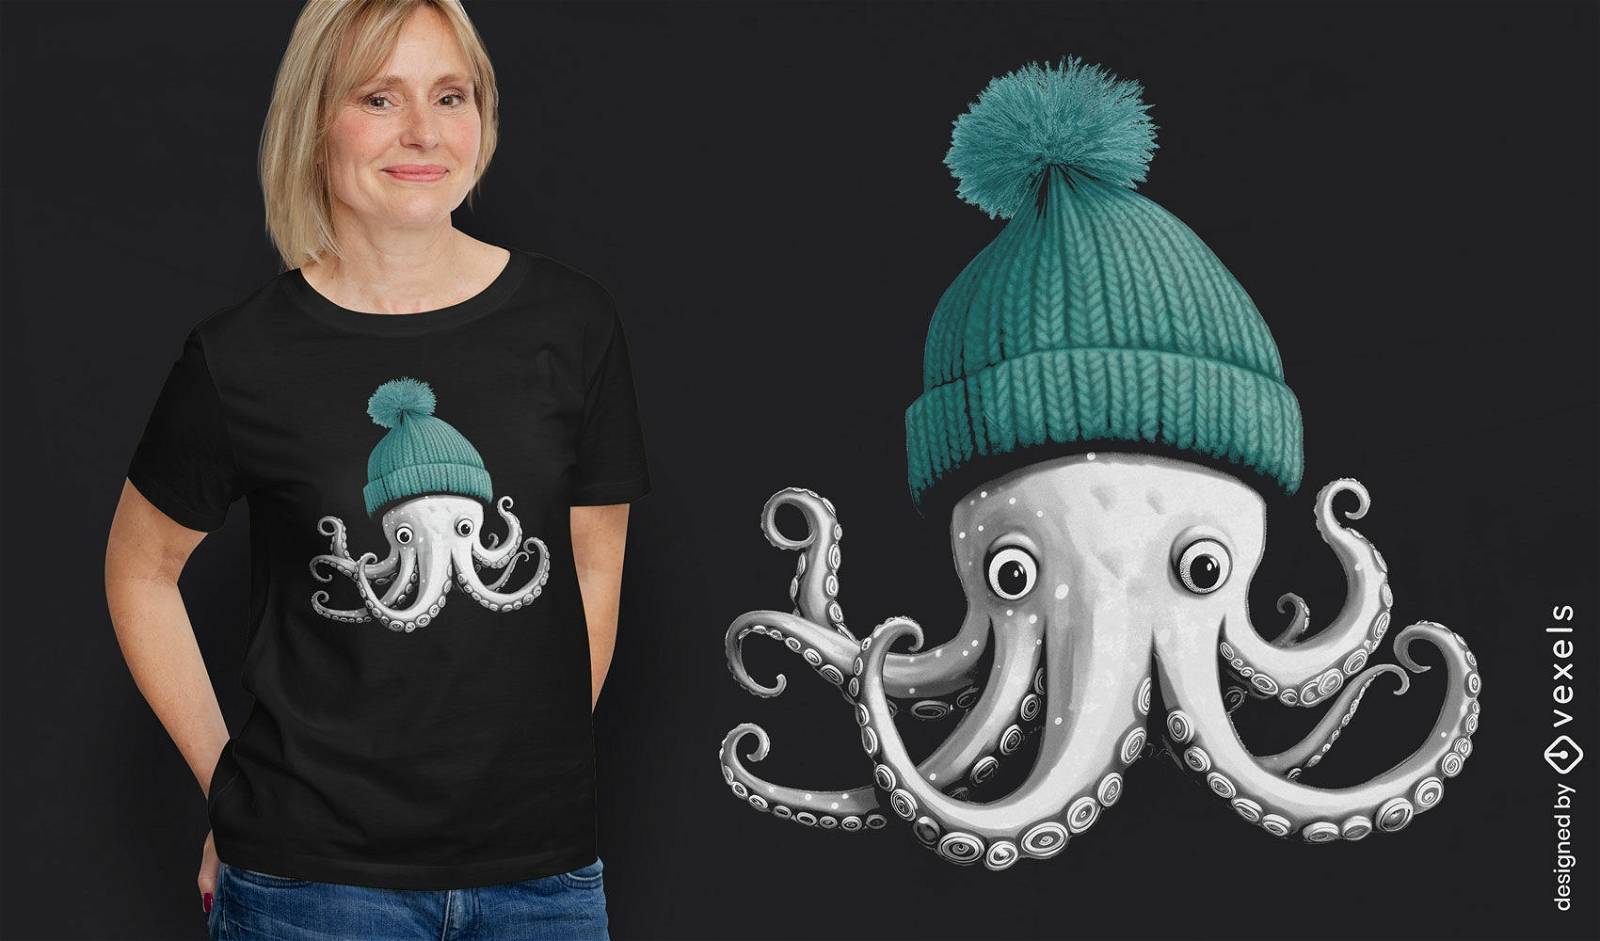 Octopus with winter hat t-shirt design